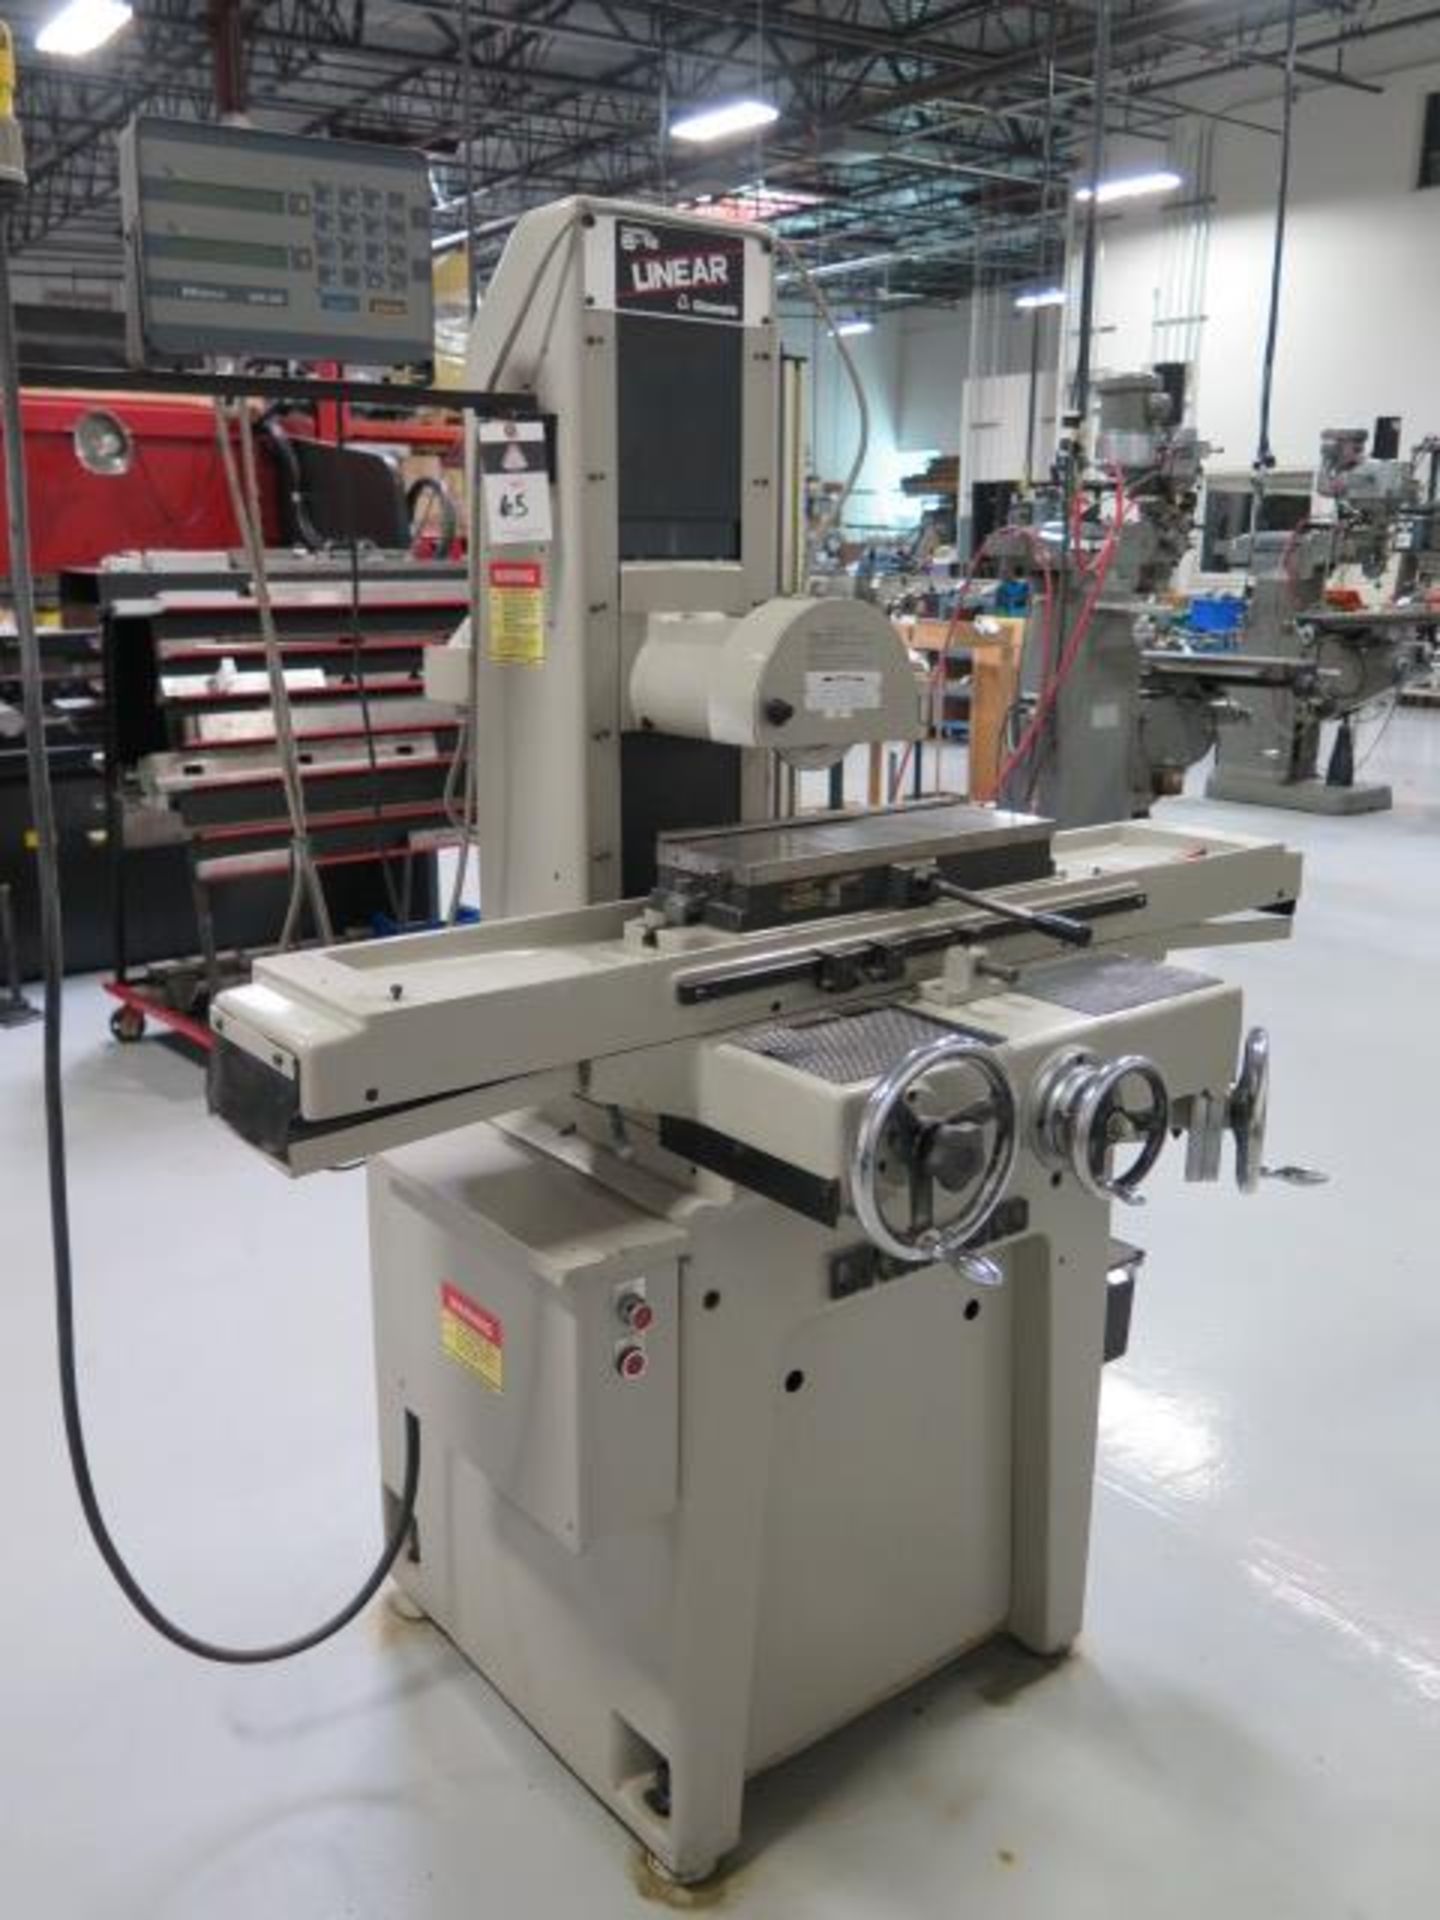 Okamoto “6-18 LINEAR” 6” x 18” Surface Grinder s/n 4469 w/ Mitutoyo UDR-220 Program DRO, SOLD AS IS - Image 3 of 15